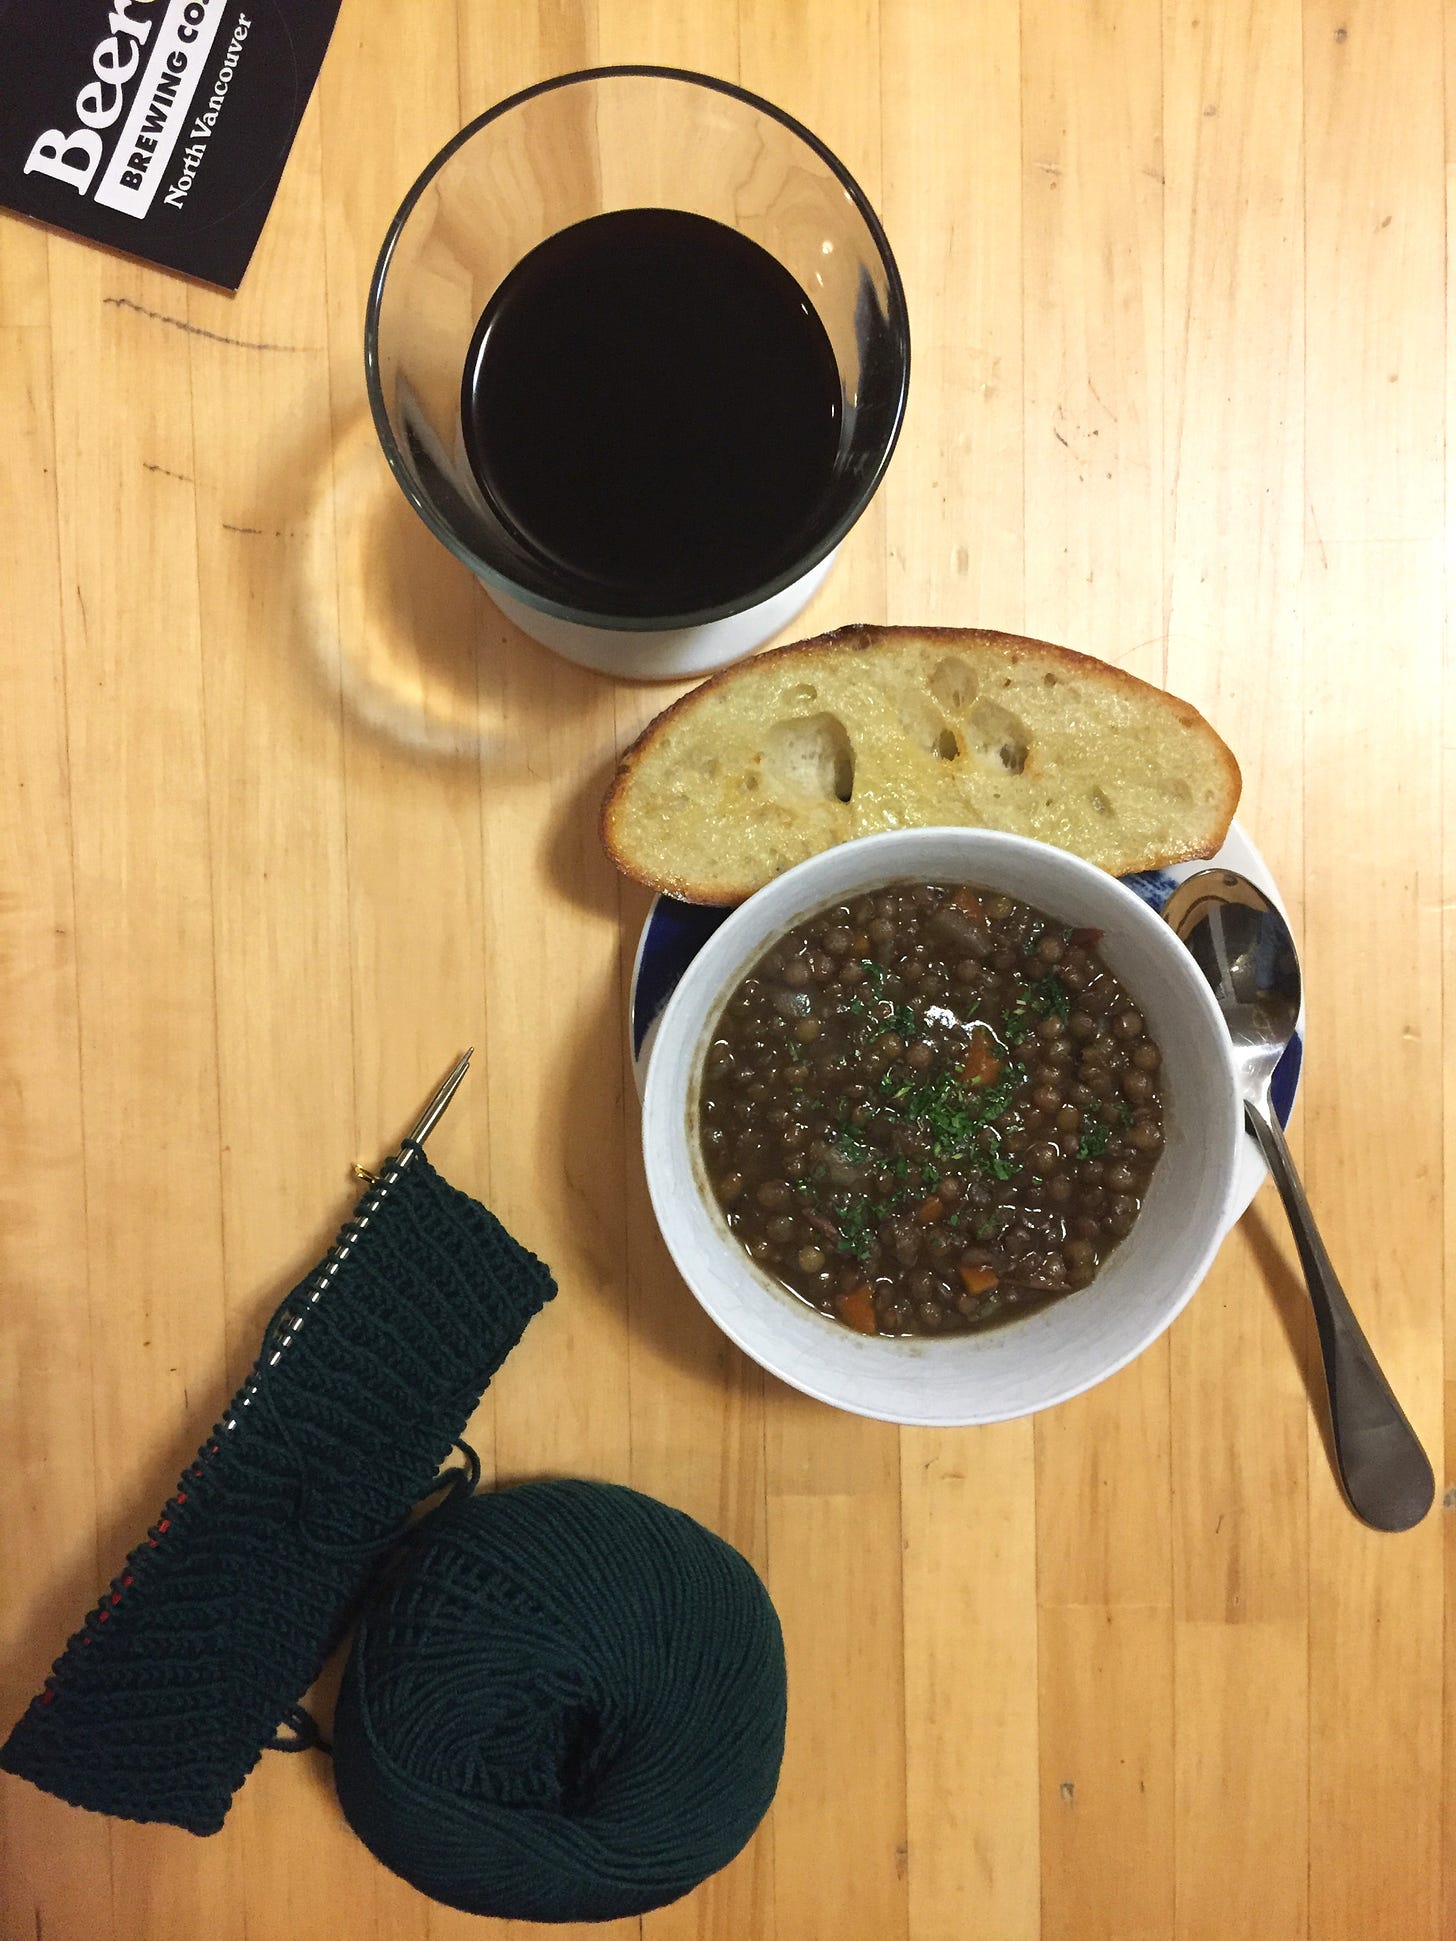 A small bowl of lentil soup topped with parsley sits on top of a plate holding a slice of sourdough and a spoon. Above it is a glass of dark beer, and a black sticker with white text reading "Beere Brewing Co." In the bottom left corner of the photo is a ball of dark green yarn and several rows of knitting on small circular needles.